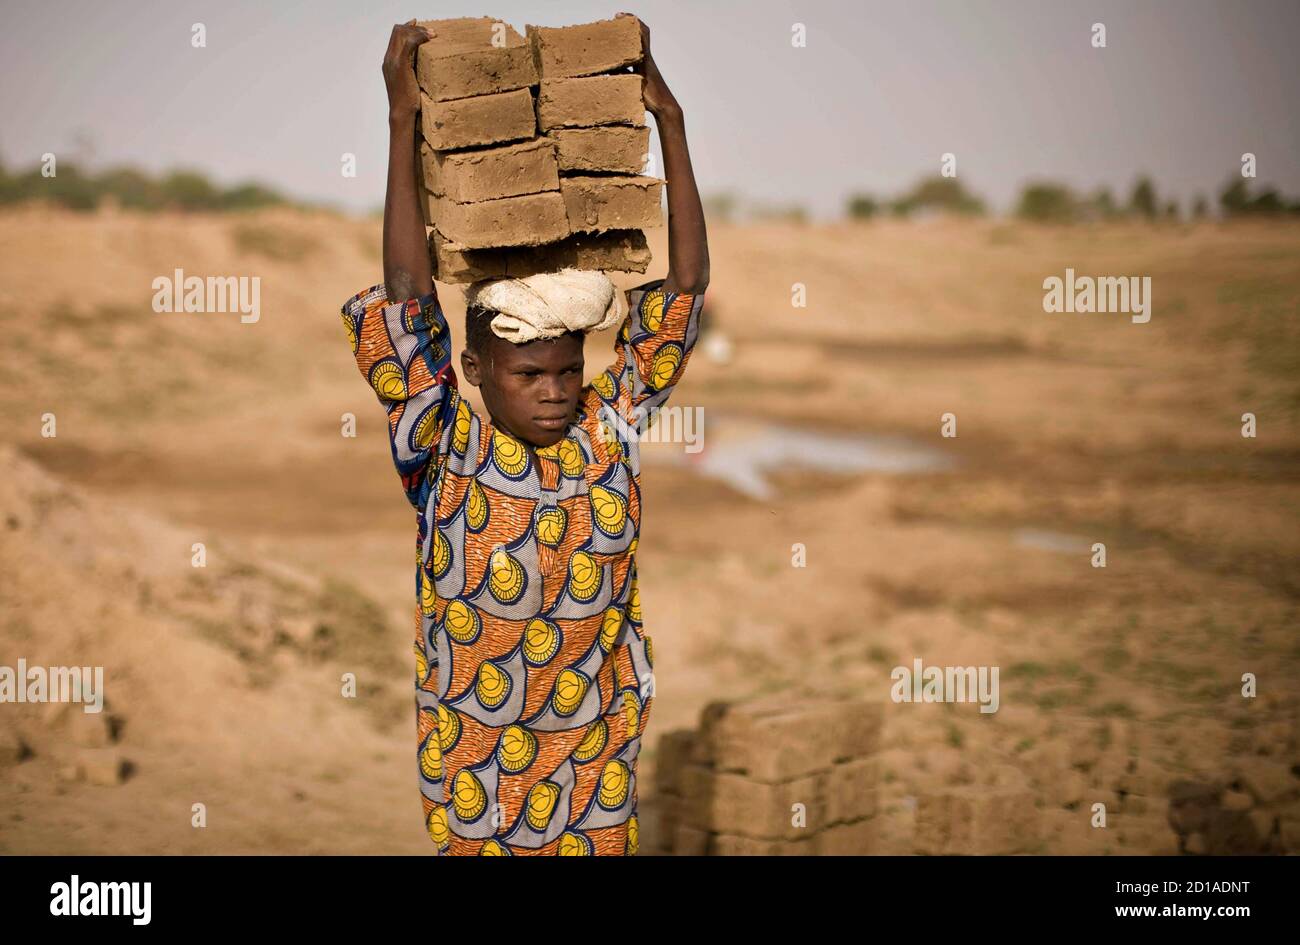 A boy carries bricks on his head at a riverside factory where mud is fired in kilns to produce building materials on the outskirts of Chad's capital N'Djamena, May 31 2008. Many children are used as cheap labour to transport bricks. REUTERS/Finbarr O'Reilly (CHAD) Stock Photo